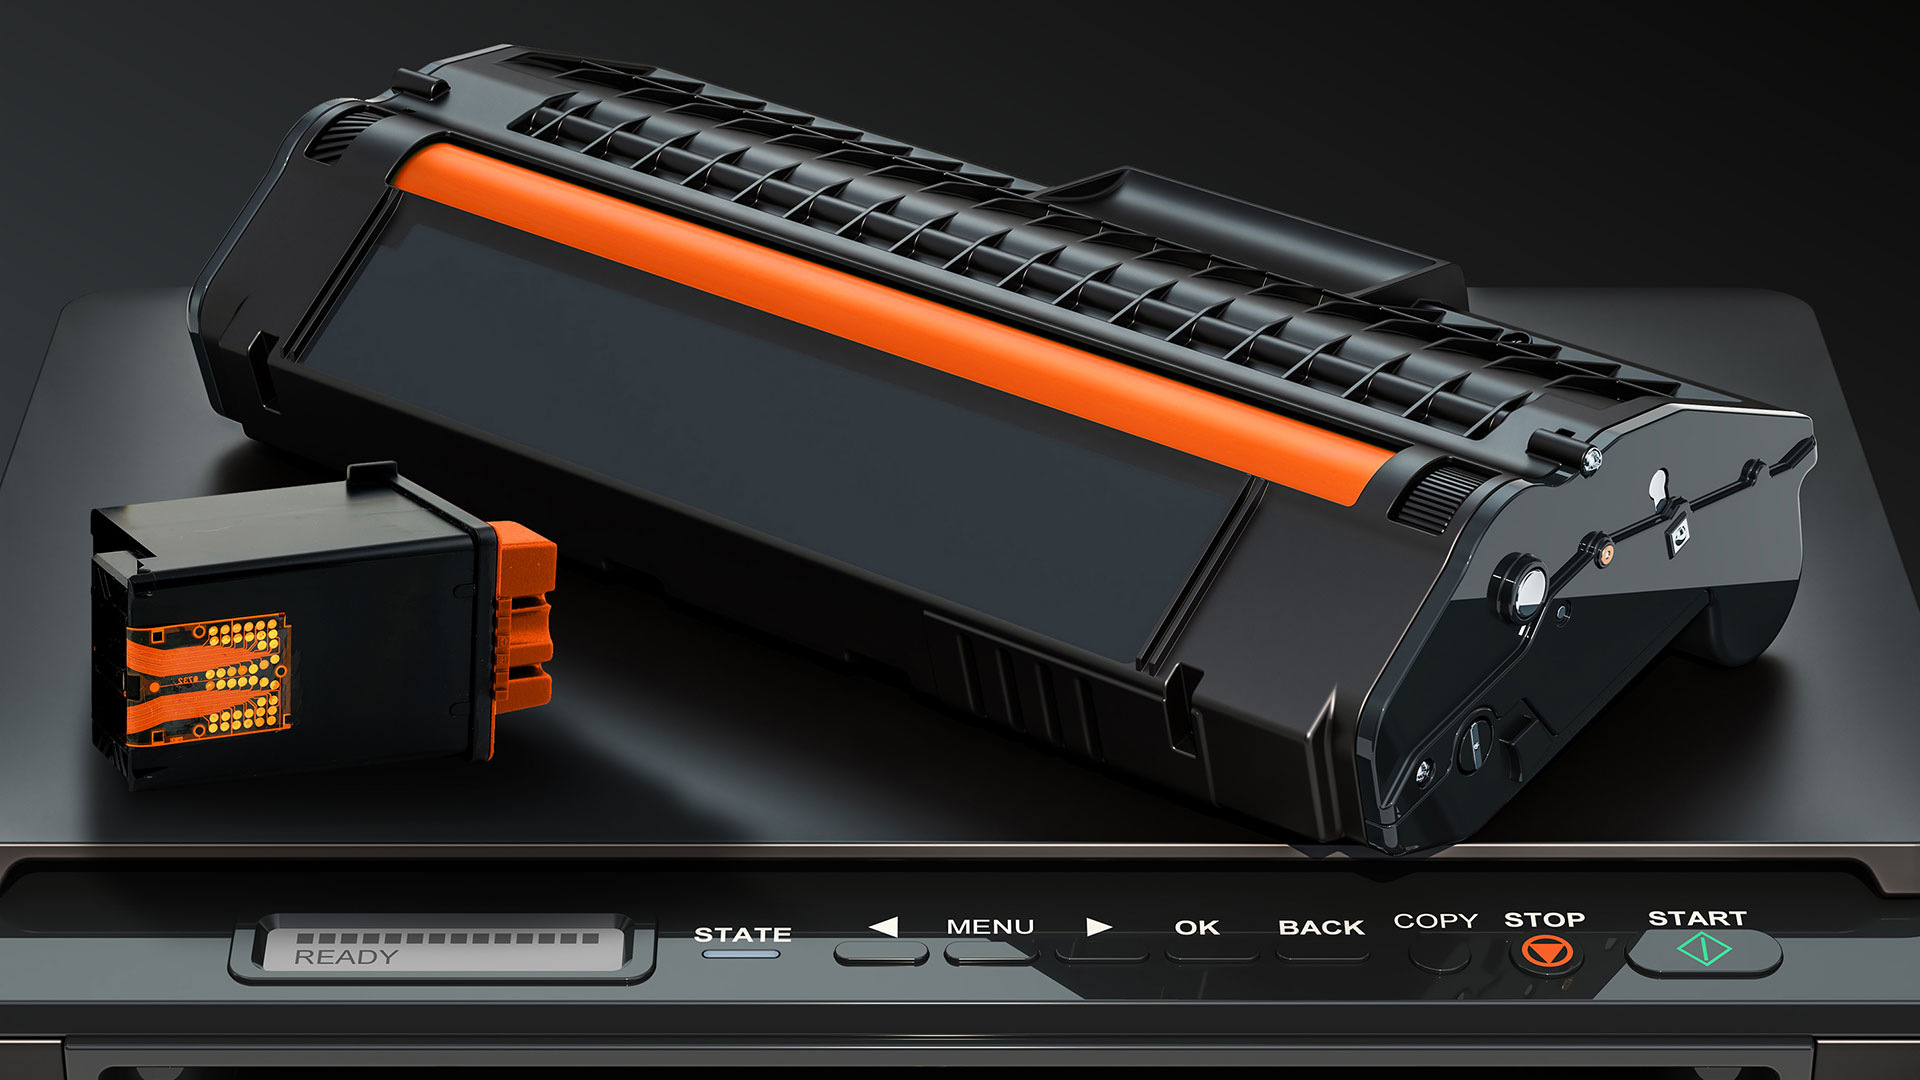 Brother MFC-L3770CDW Toner Cartridges from $24.95